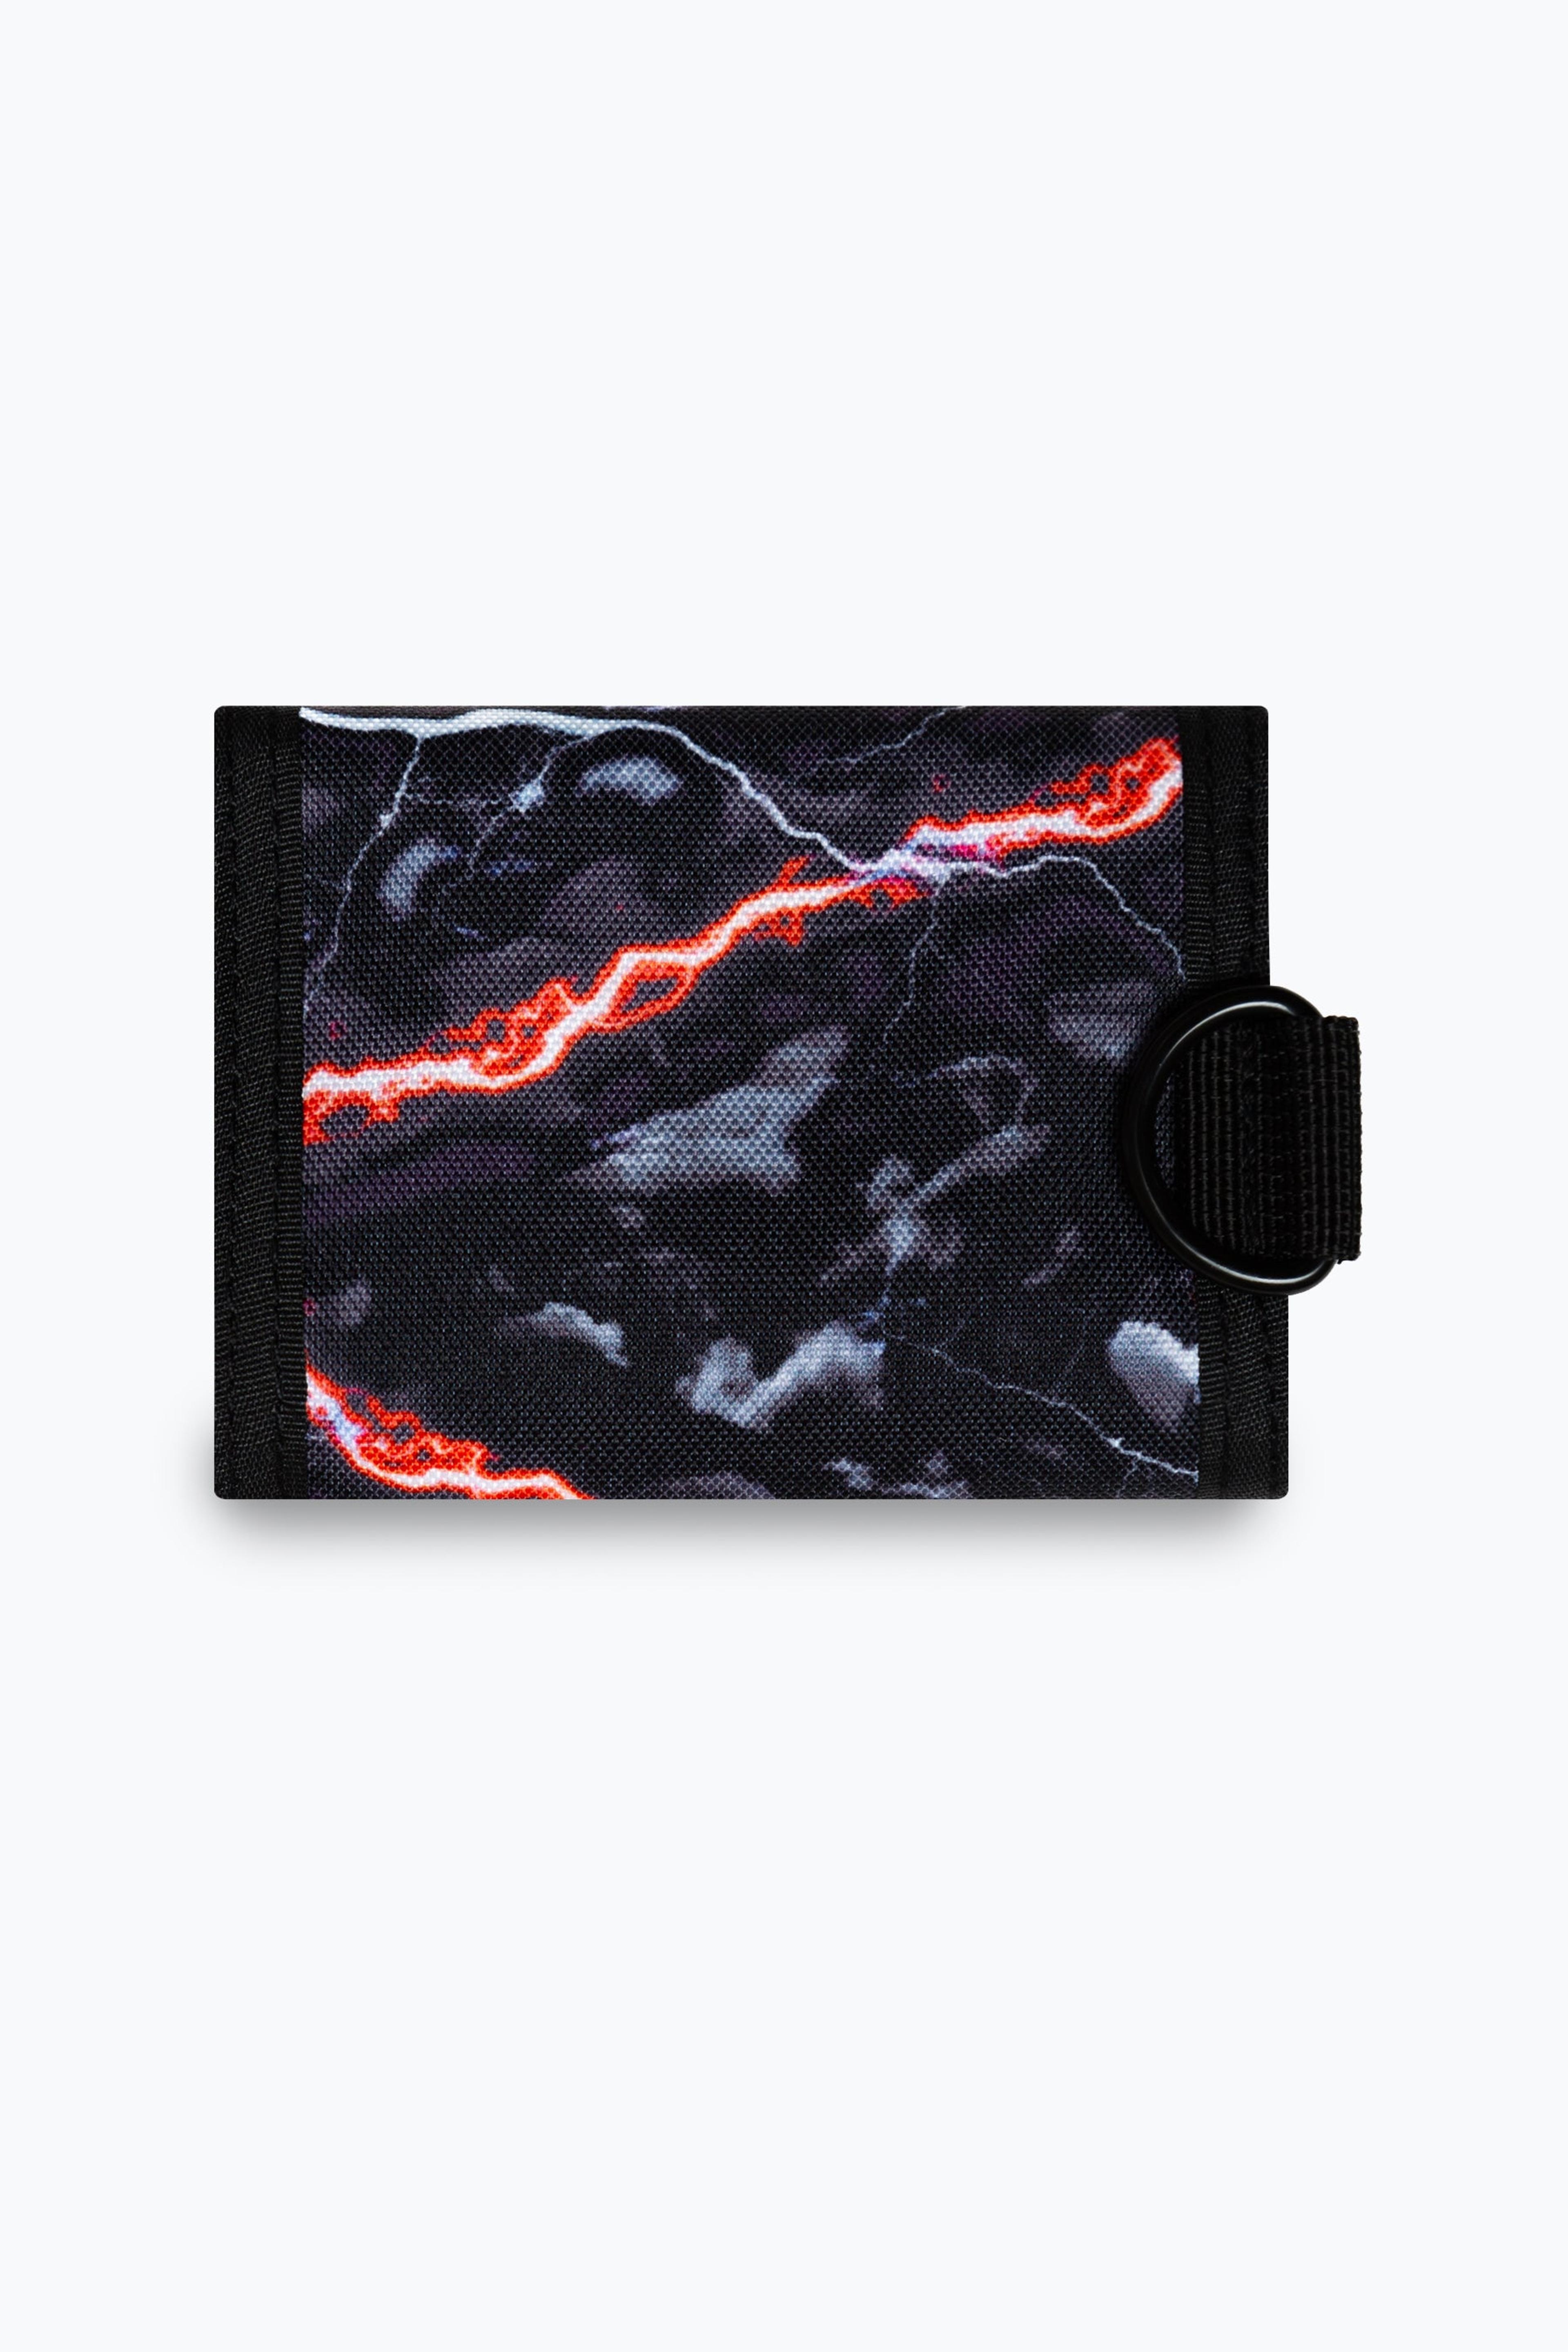 Alternate View 2 of HYPE UNISEX BLACK SMOKEY STORM OUTLINE CREST WALLET